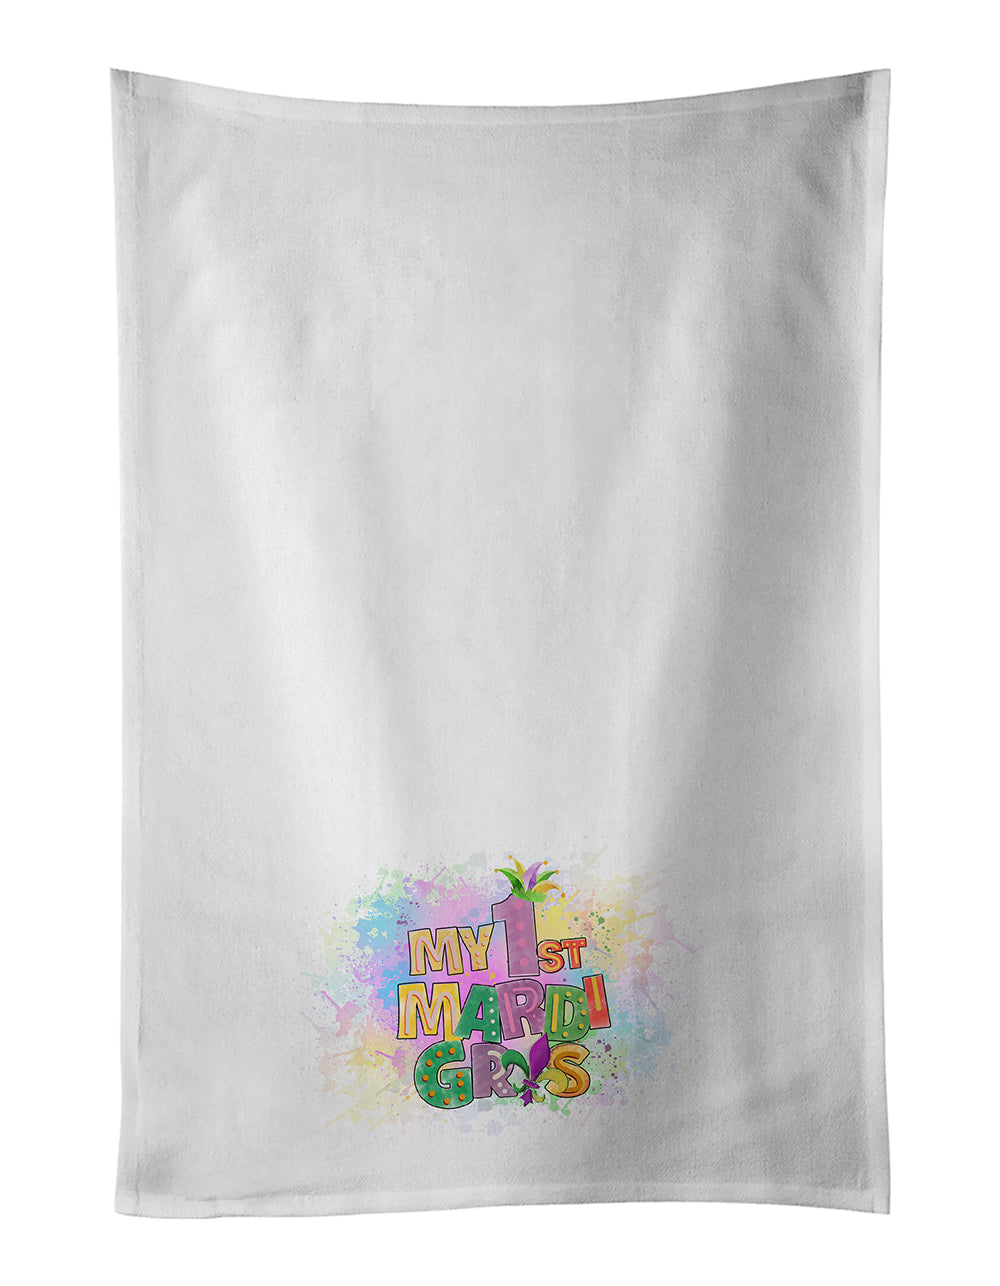 Buy this My 1st Mardi Gras White Kitchen Towel Set of 2 Dish Towels